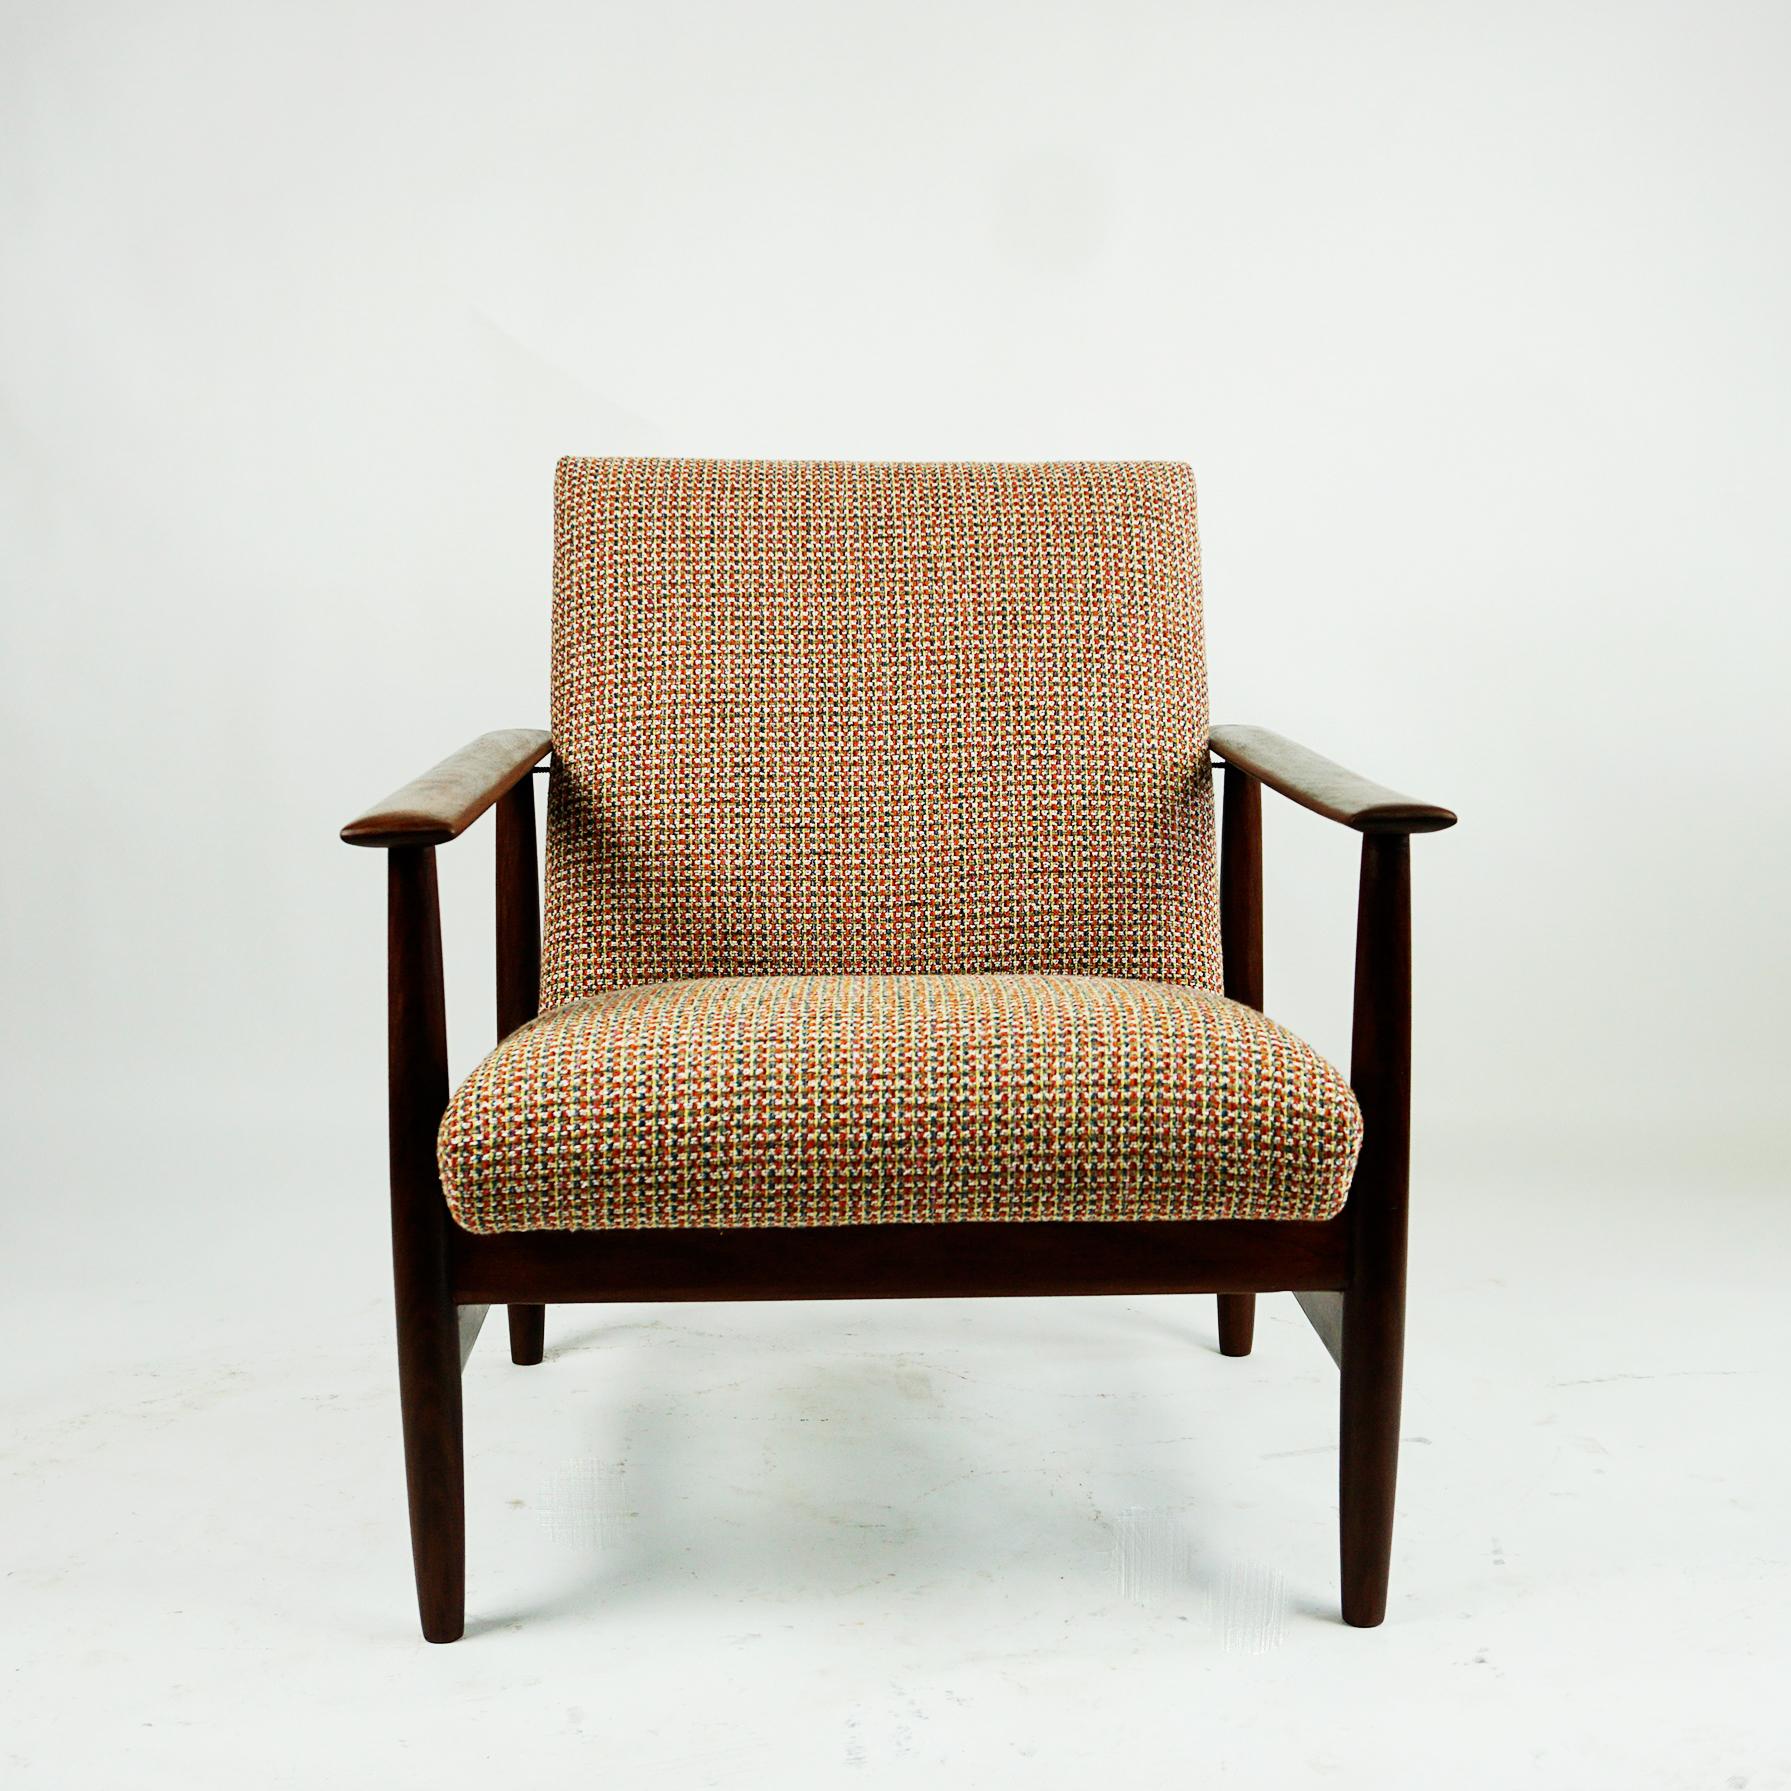 This light and highly comfortable Easy or Lounge chair was produced by Knoll Antimott, Germany in the 1960s. It features a brown mahogany wood frame and newly upholstered with top quality fabric cushions in different warm colours like soft orange,